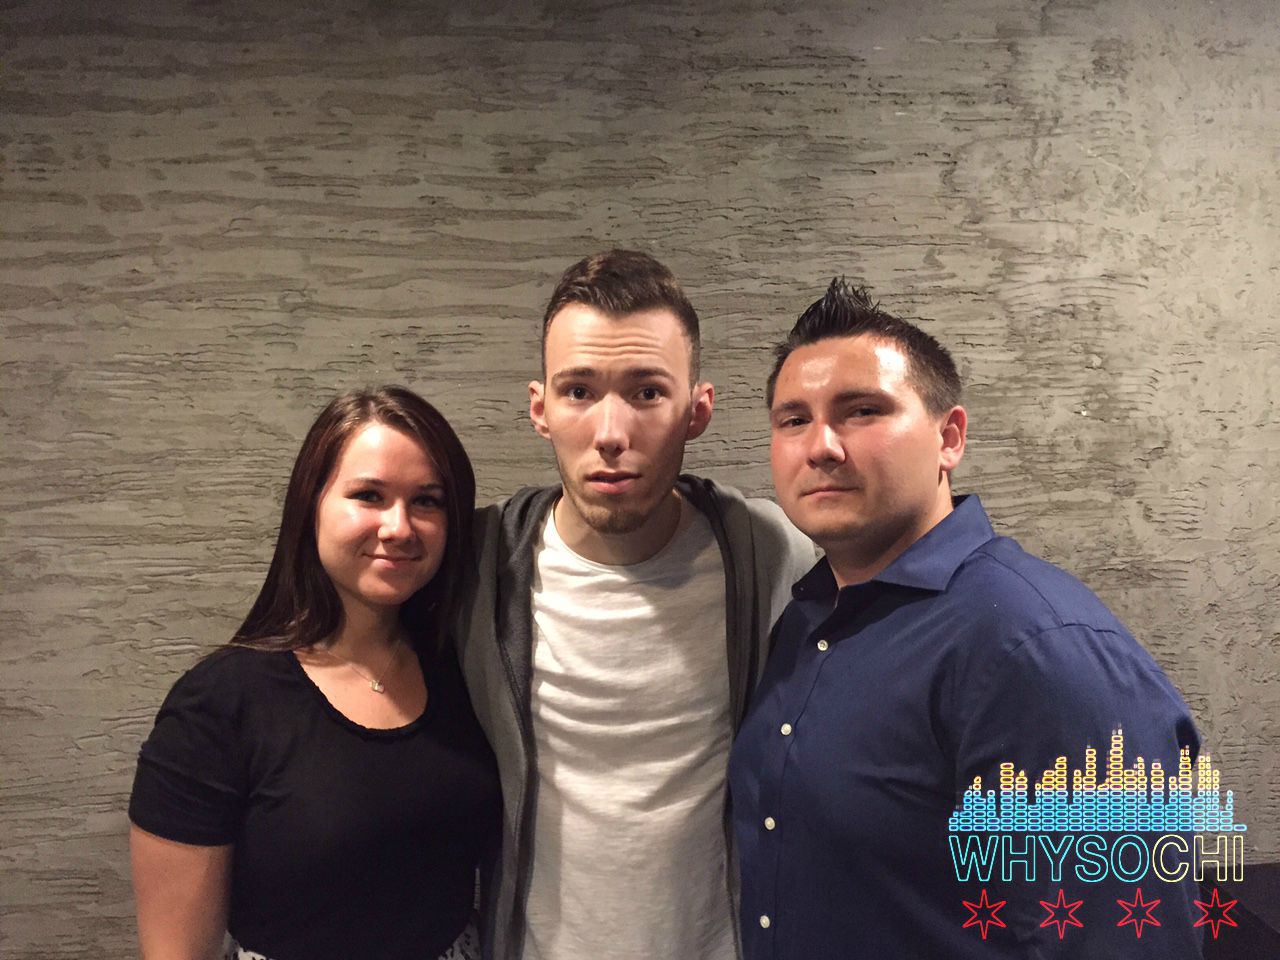 Tom Swoon With WhySoChi